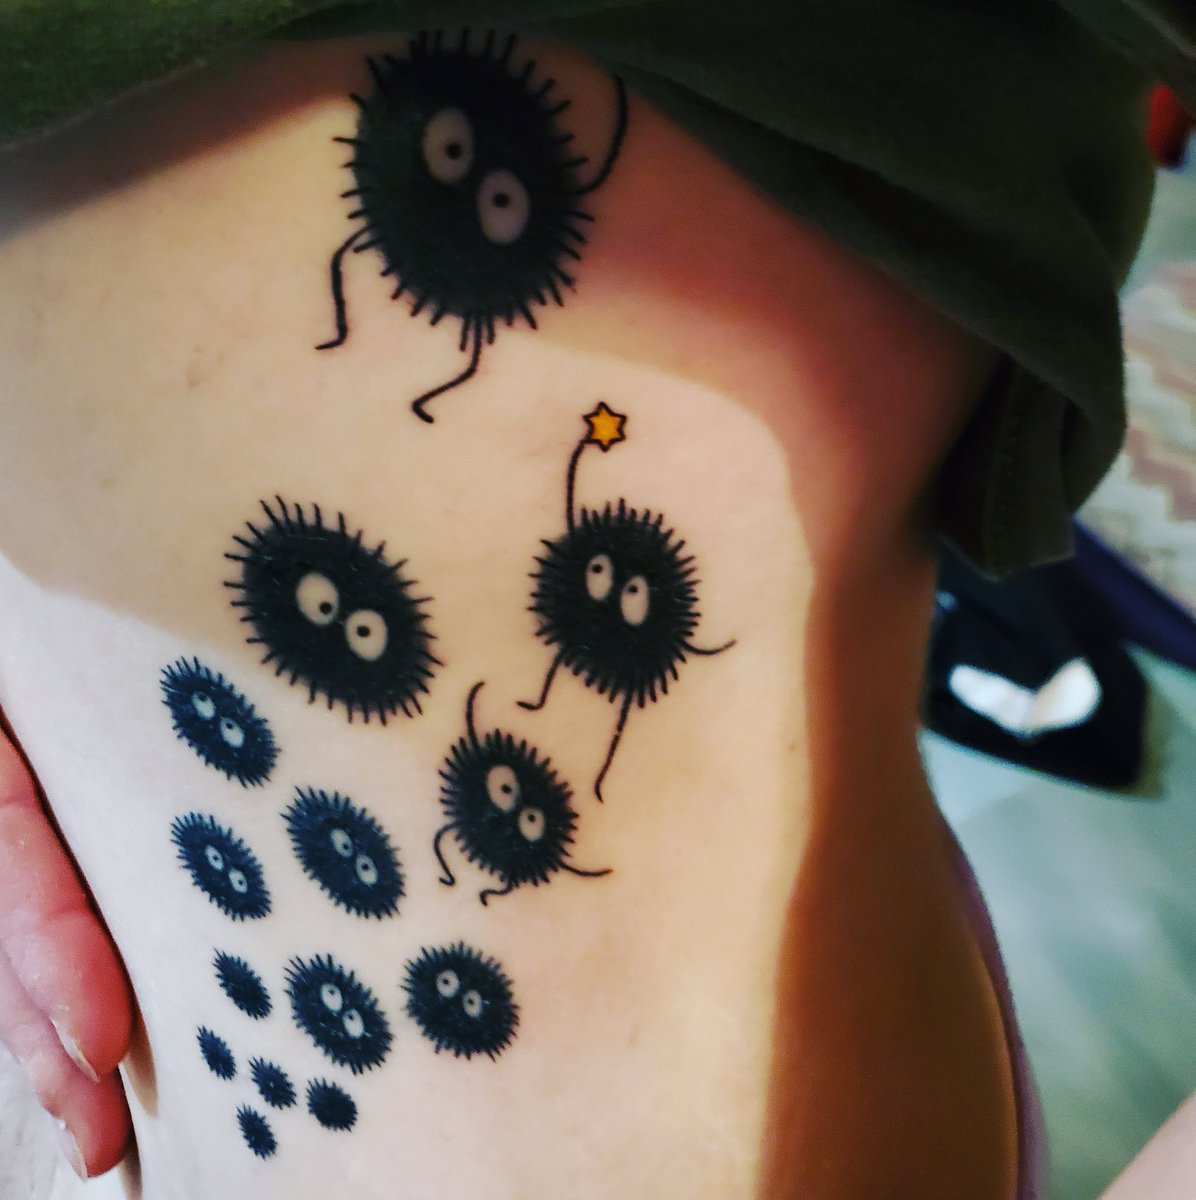 Deja Vu Tattoo and Piercing  Calcifer from Howls Moving Castle by Roe   Facebook